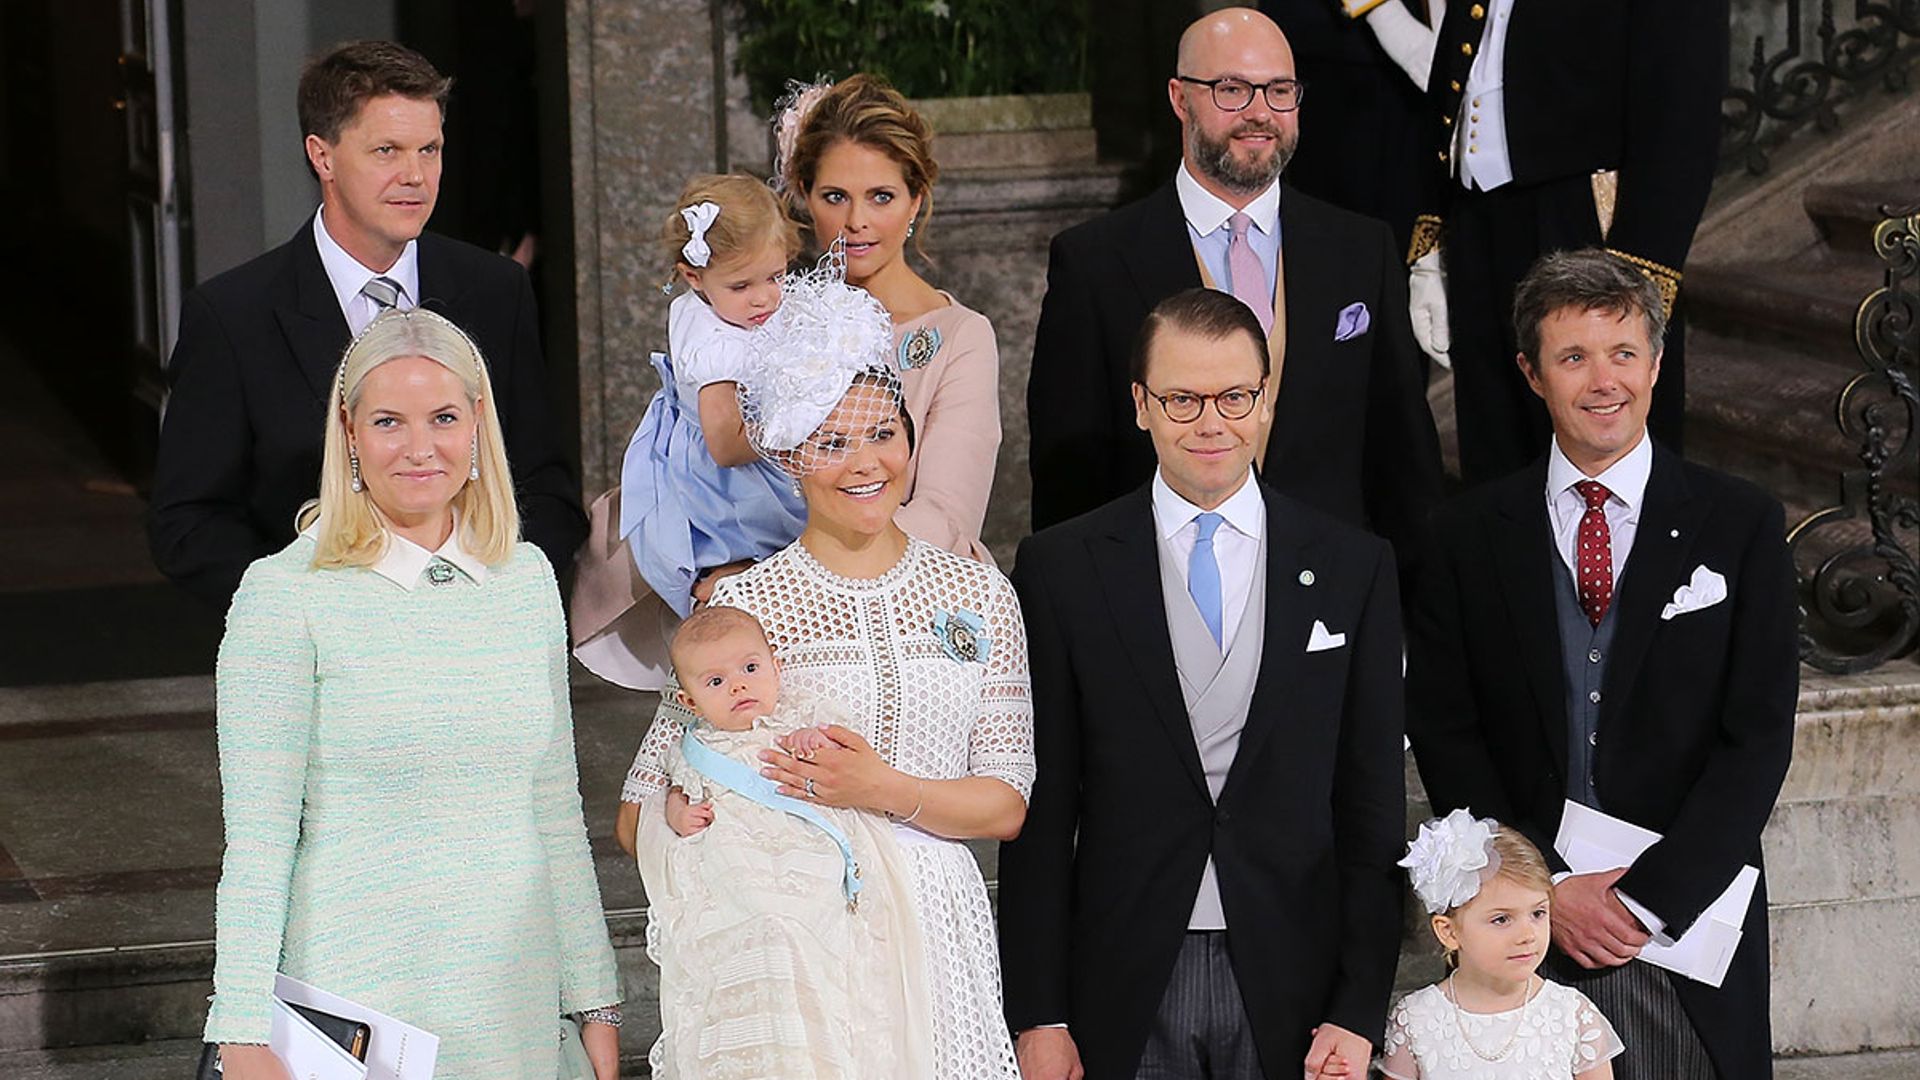 European royals to reunite in Norway for Princess Ingrid's confirmation this weekend